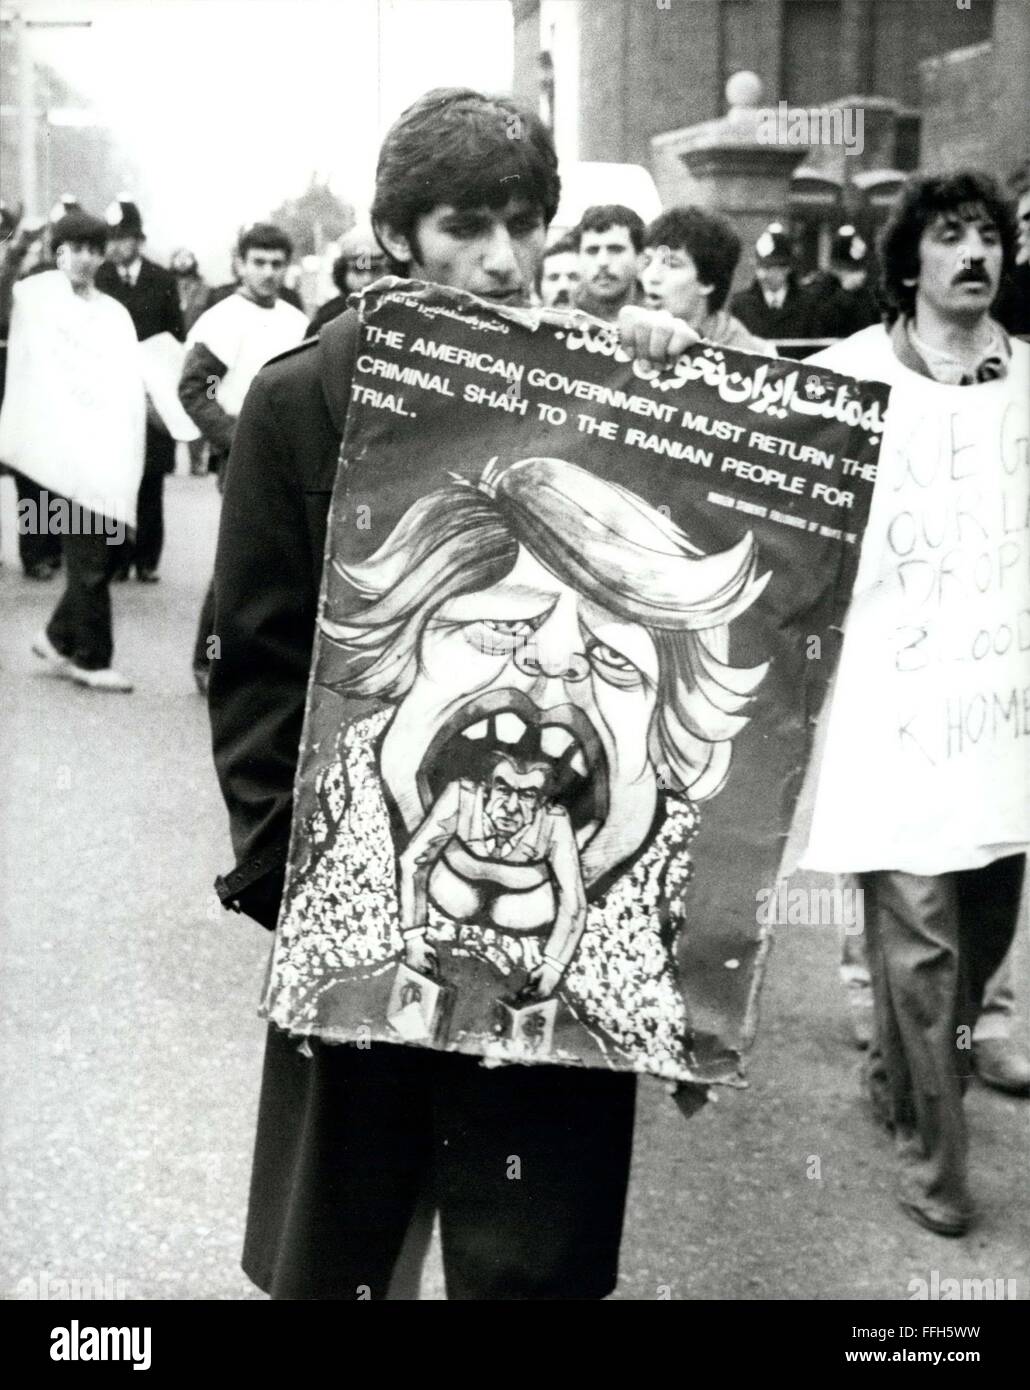 1980 - 1st May 1980 Iranian Embassy Siege A demonstrator in Kensington Gore, London, near the Iranian Embassy, carrying a poster caricaturing President Carter and demanding the former Shah s return to his country. This and other demonstrations appear to have no direct connection with the siege of the embassy which is now in it second day. © Keystone Pictures USA/ZUMAPRESS.com/Alamy Live News Stock Photo